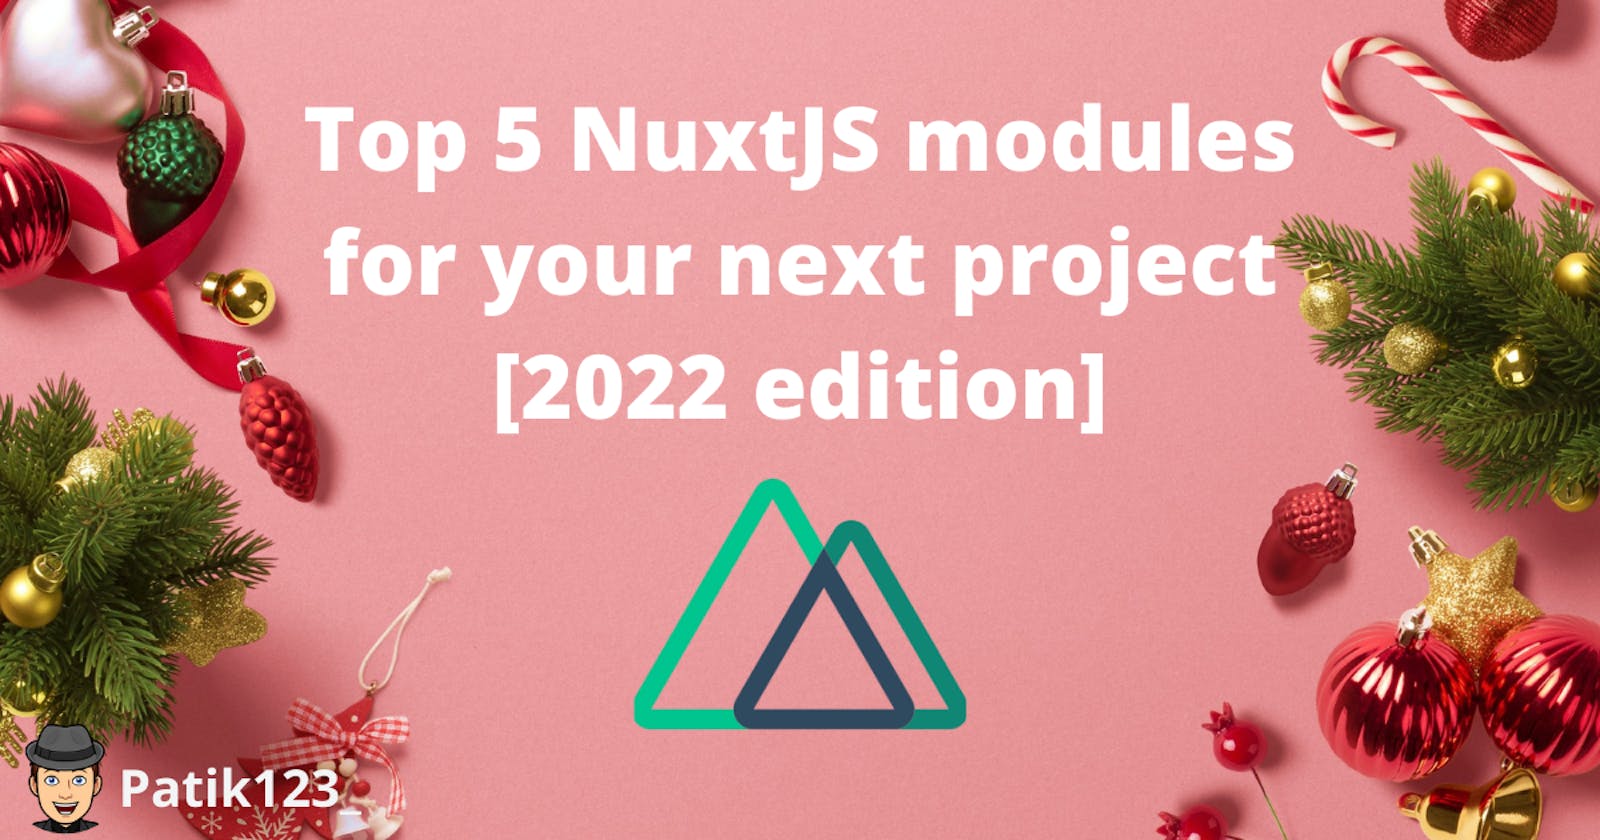 Top 5 NuxtJS modules for your next project [2022 edition]